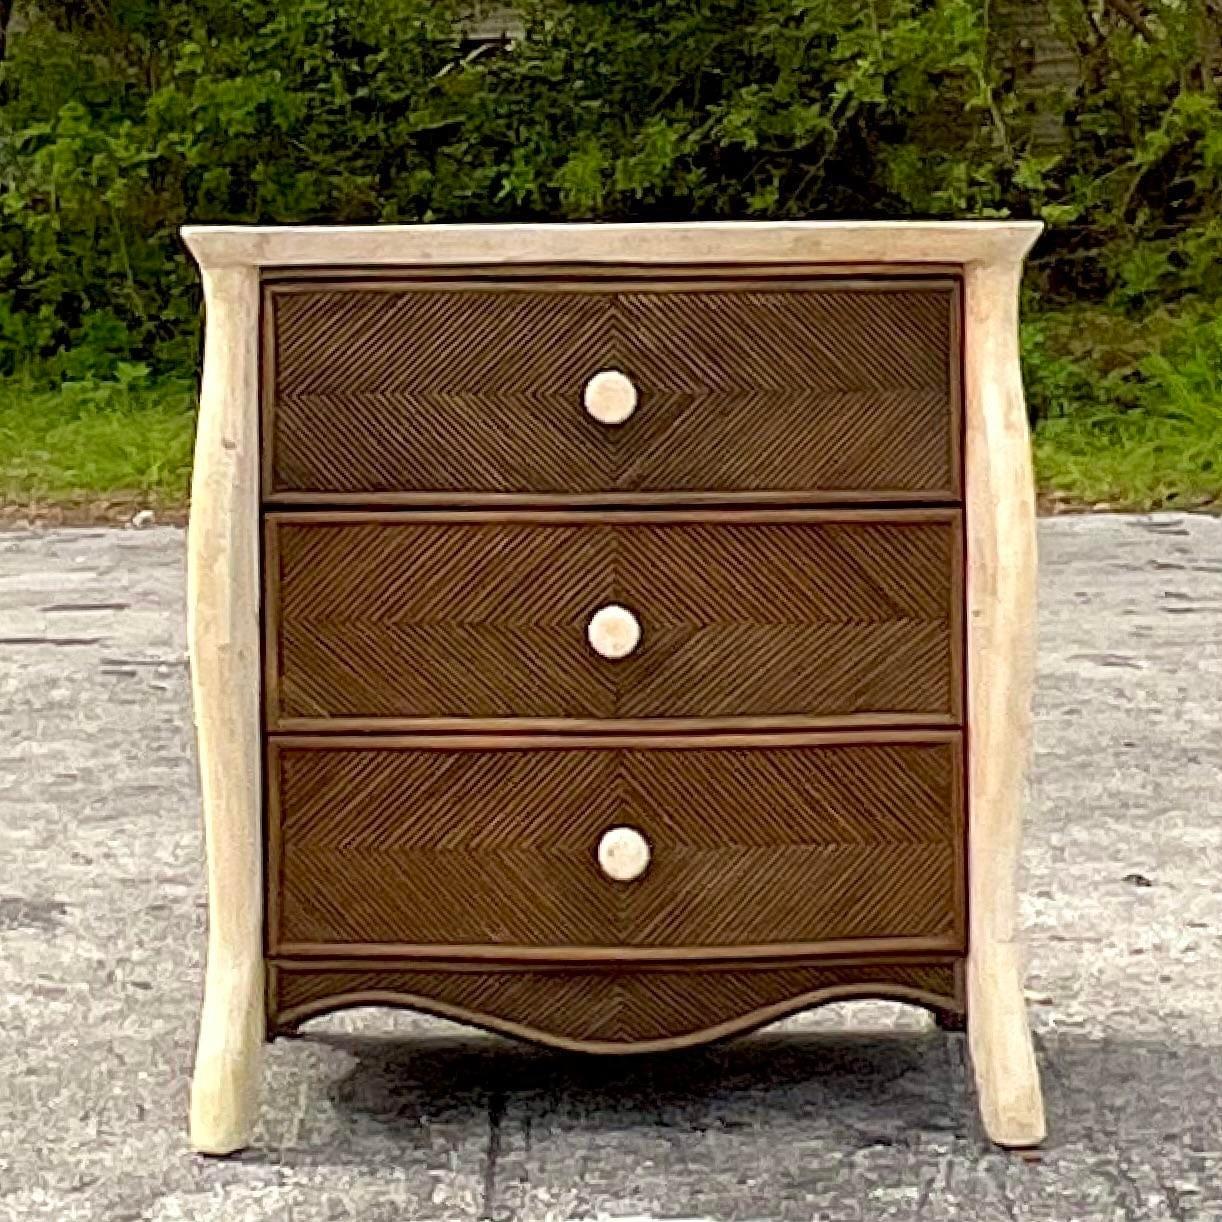 A fabulous vintage Coastal chest of drawers. A chic ebony pencil reed in a Chevron design. Tessellated stone trim along the frame. Acquired from a Palm Beach estate.